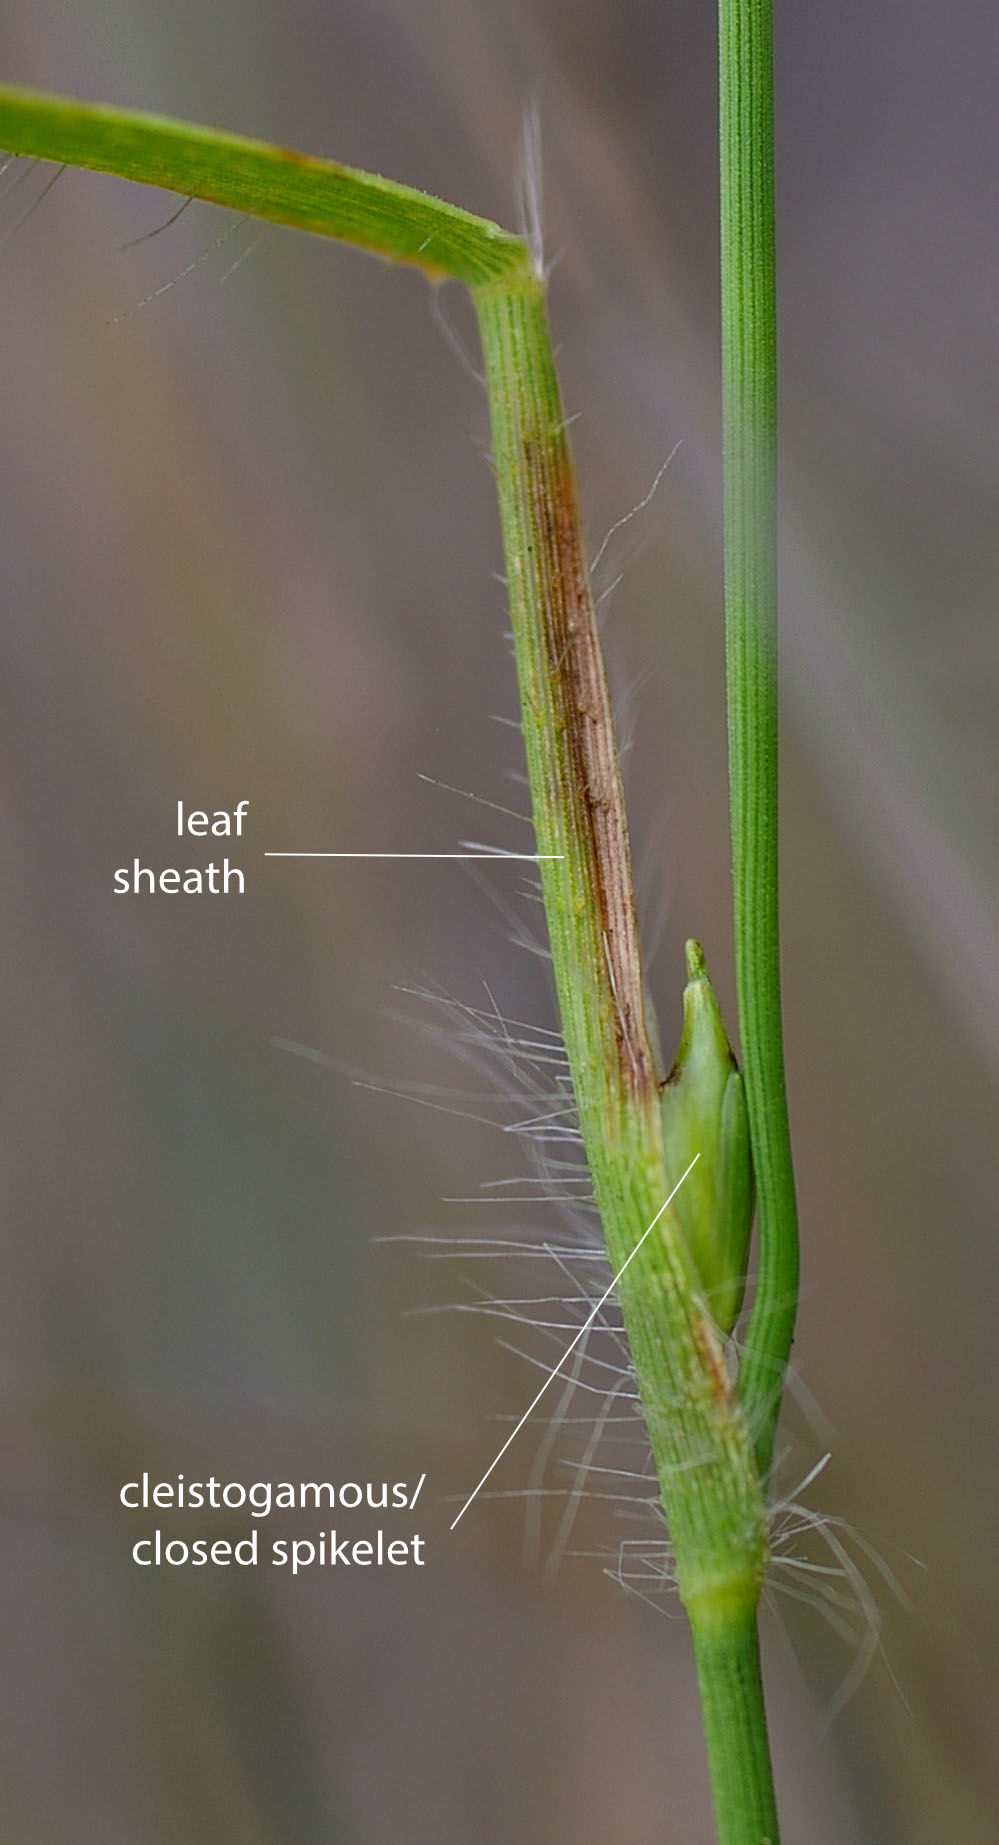 Fig. 4. Image showing closed spikelet in axil of leaves of Cleistochloa subjuncea (PHOTO: RJ Cumming d18688a).